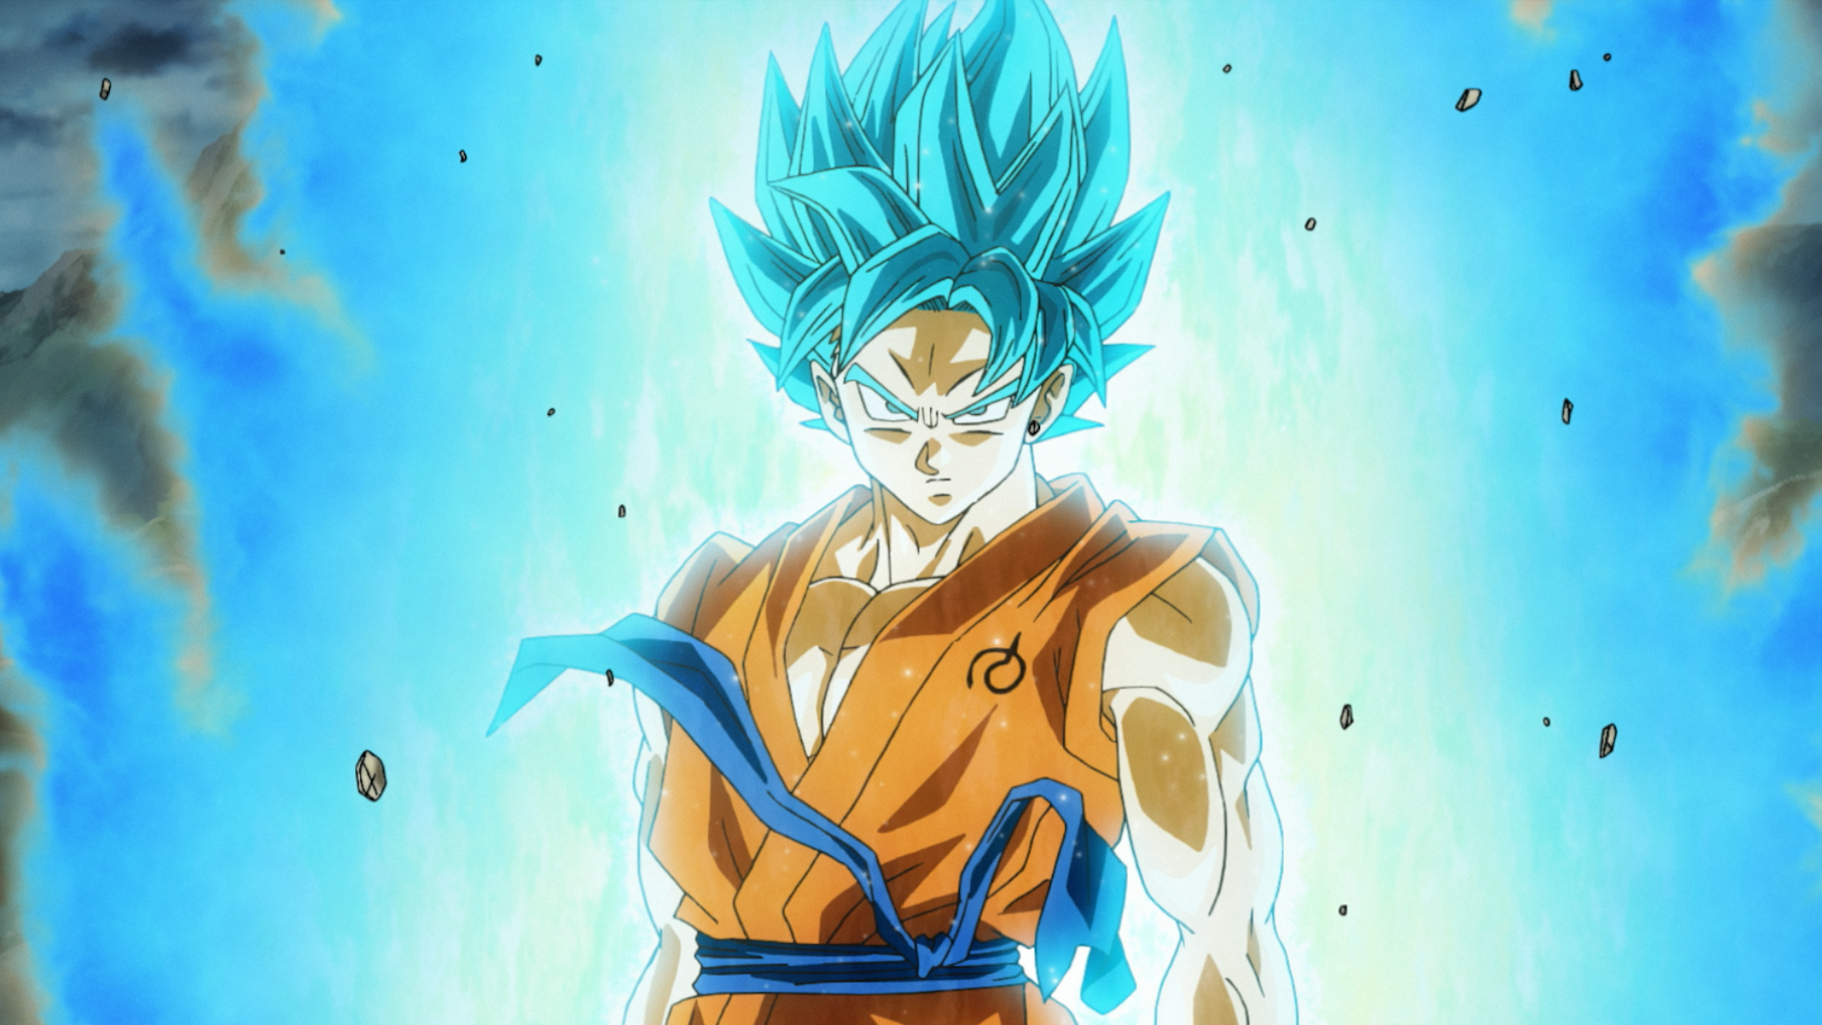 Dragon Ball Z: Resurrection F Grossed Another $1.36M On Saturday To Bring Its Five Day Total To $5.58M. Anime Dragon Ball Super, Anime Dragon Ball, Dragon Ball Z